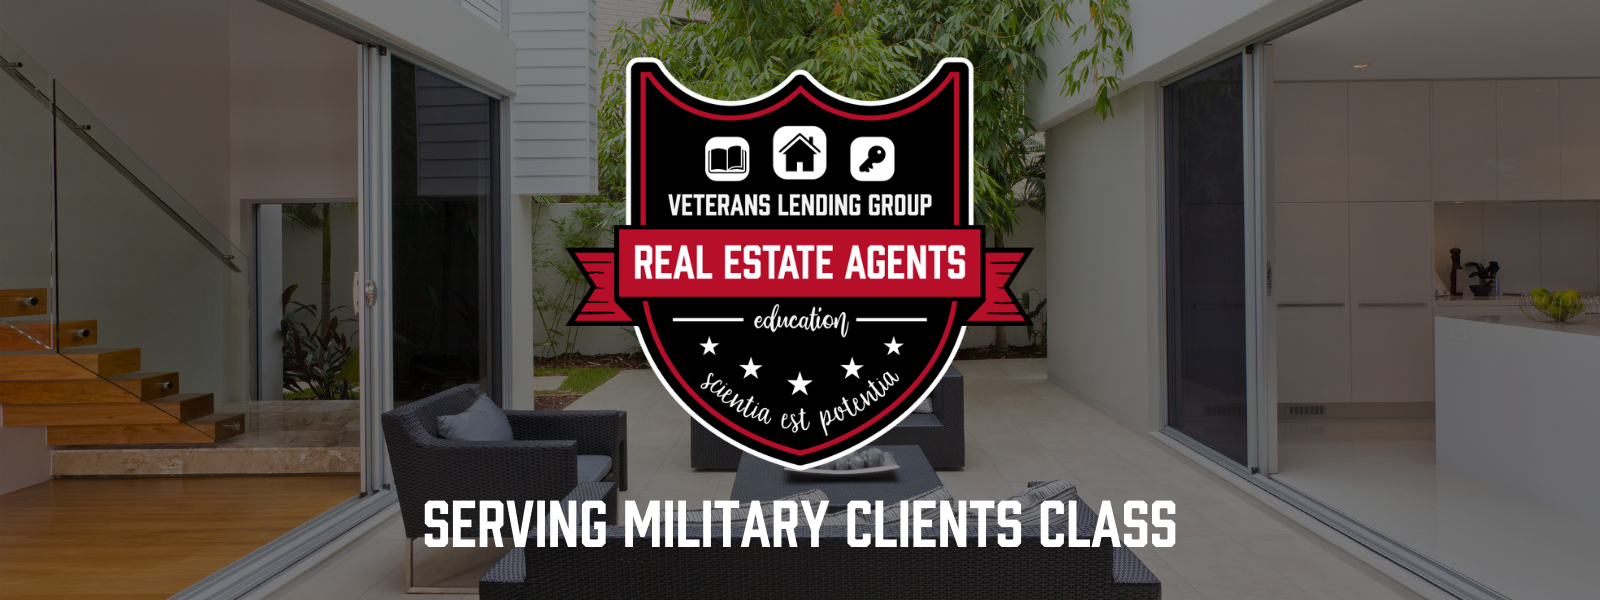 Free Real Estate Agents Serving Military Clients Class – Arroyo Grande, CA